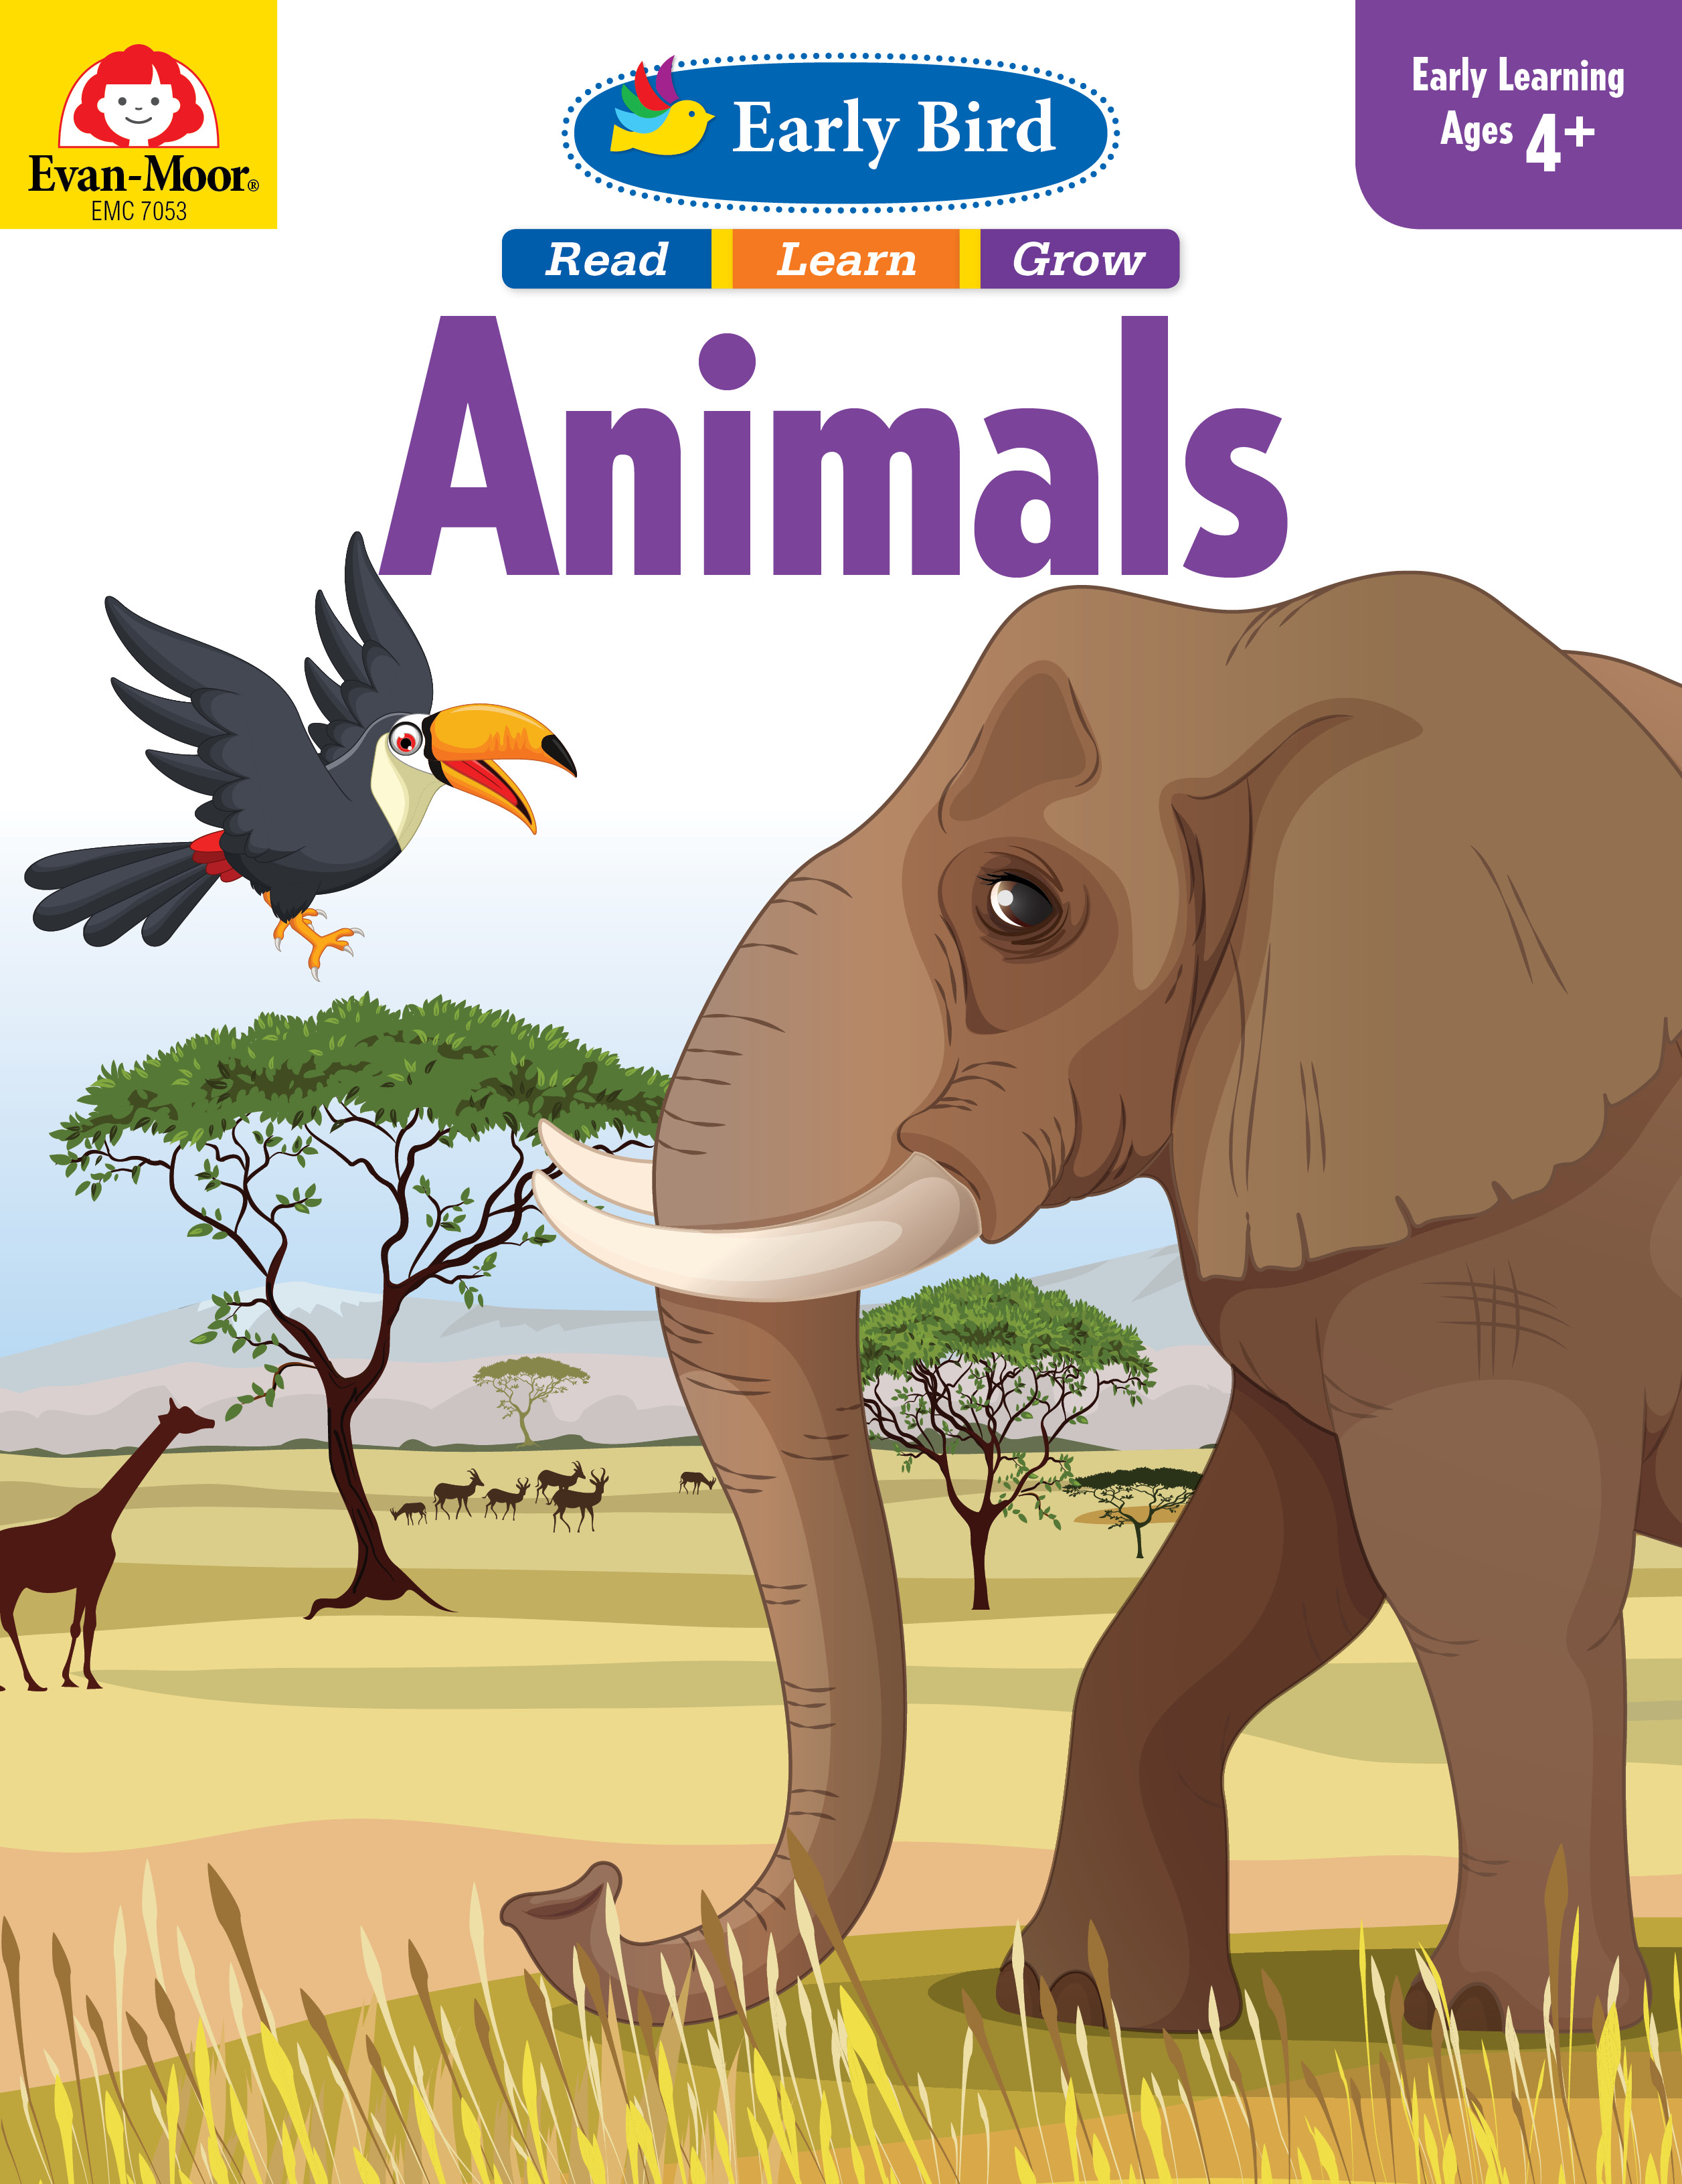 Early Bird Series - Ages 4+ by Evan-Moor Educational Publishers